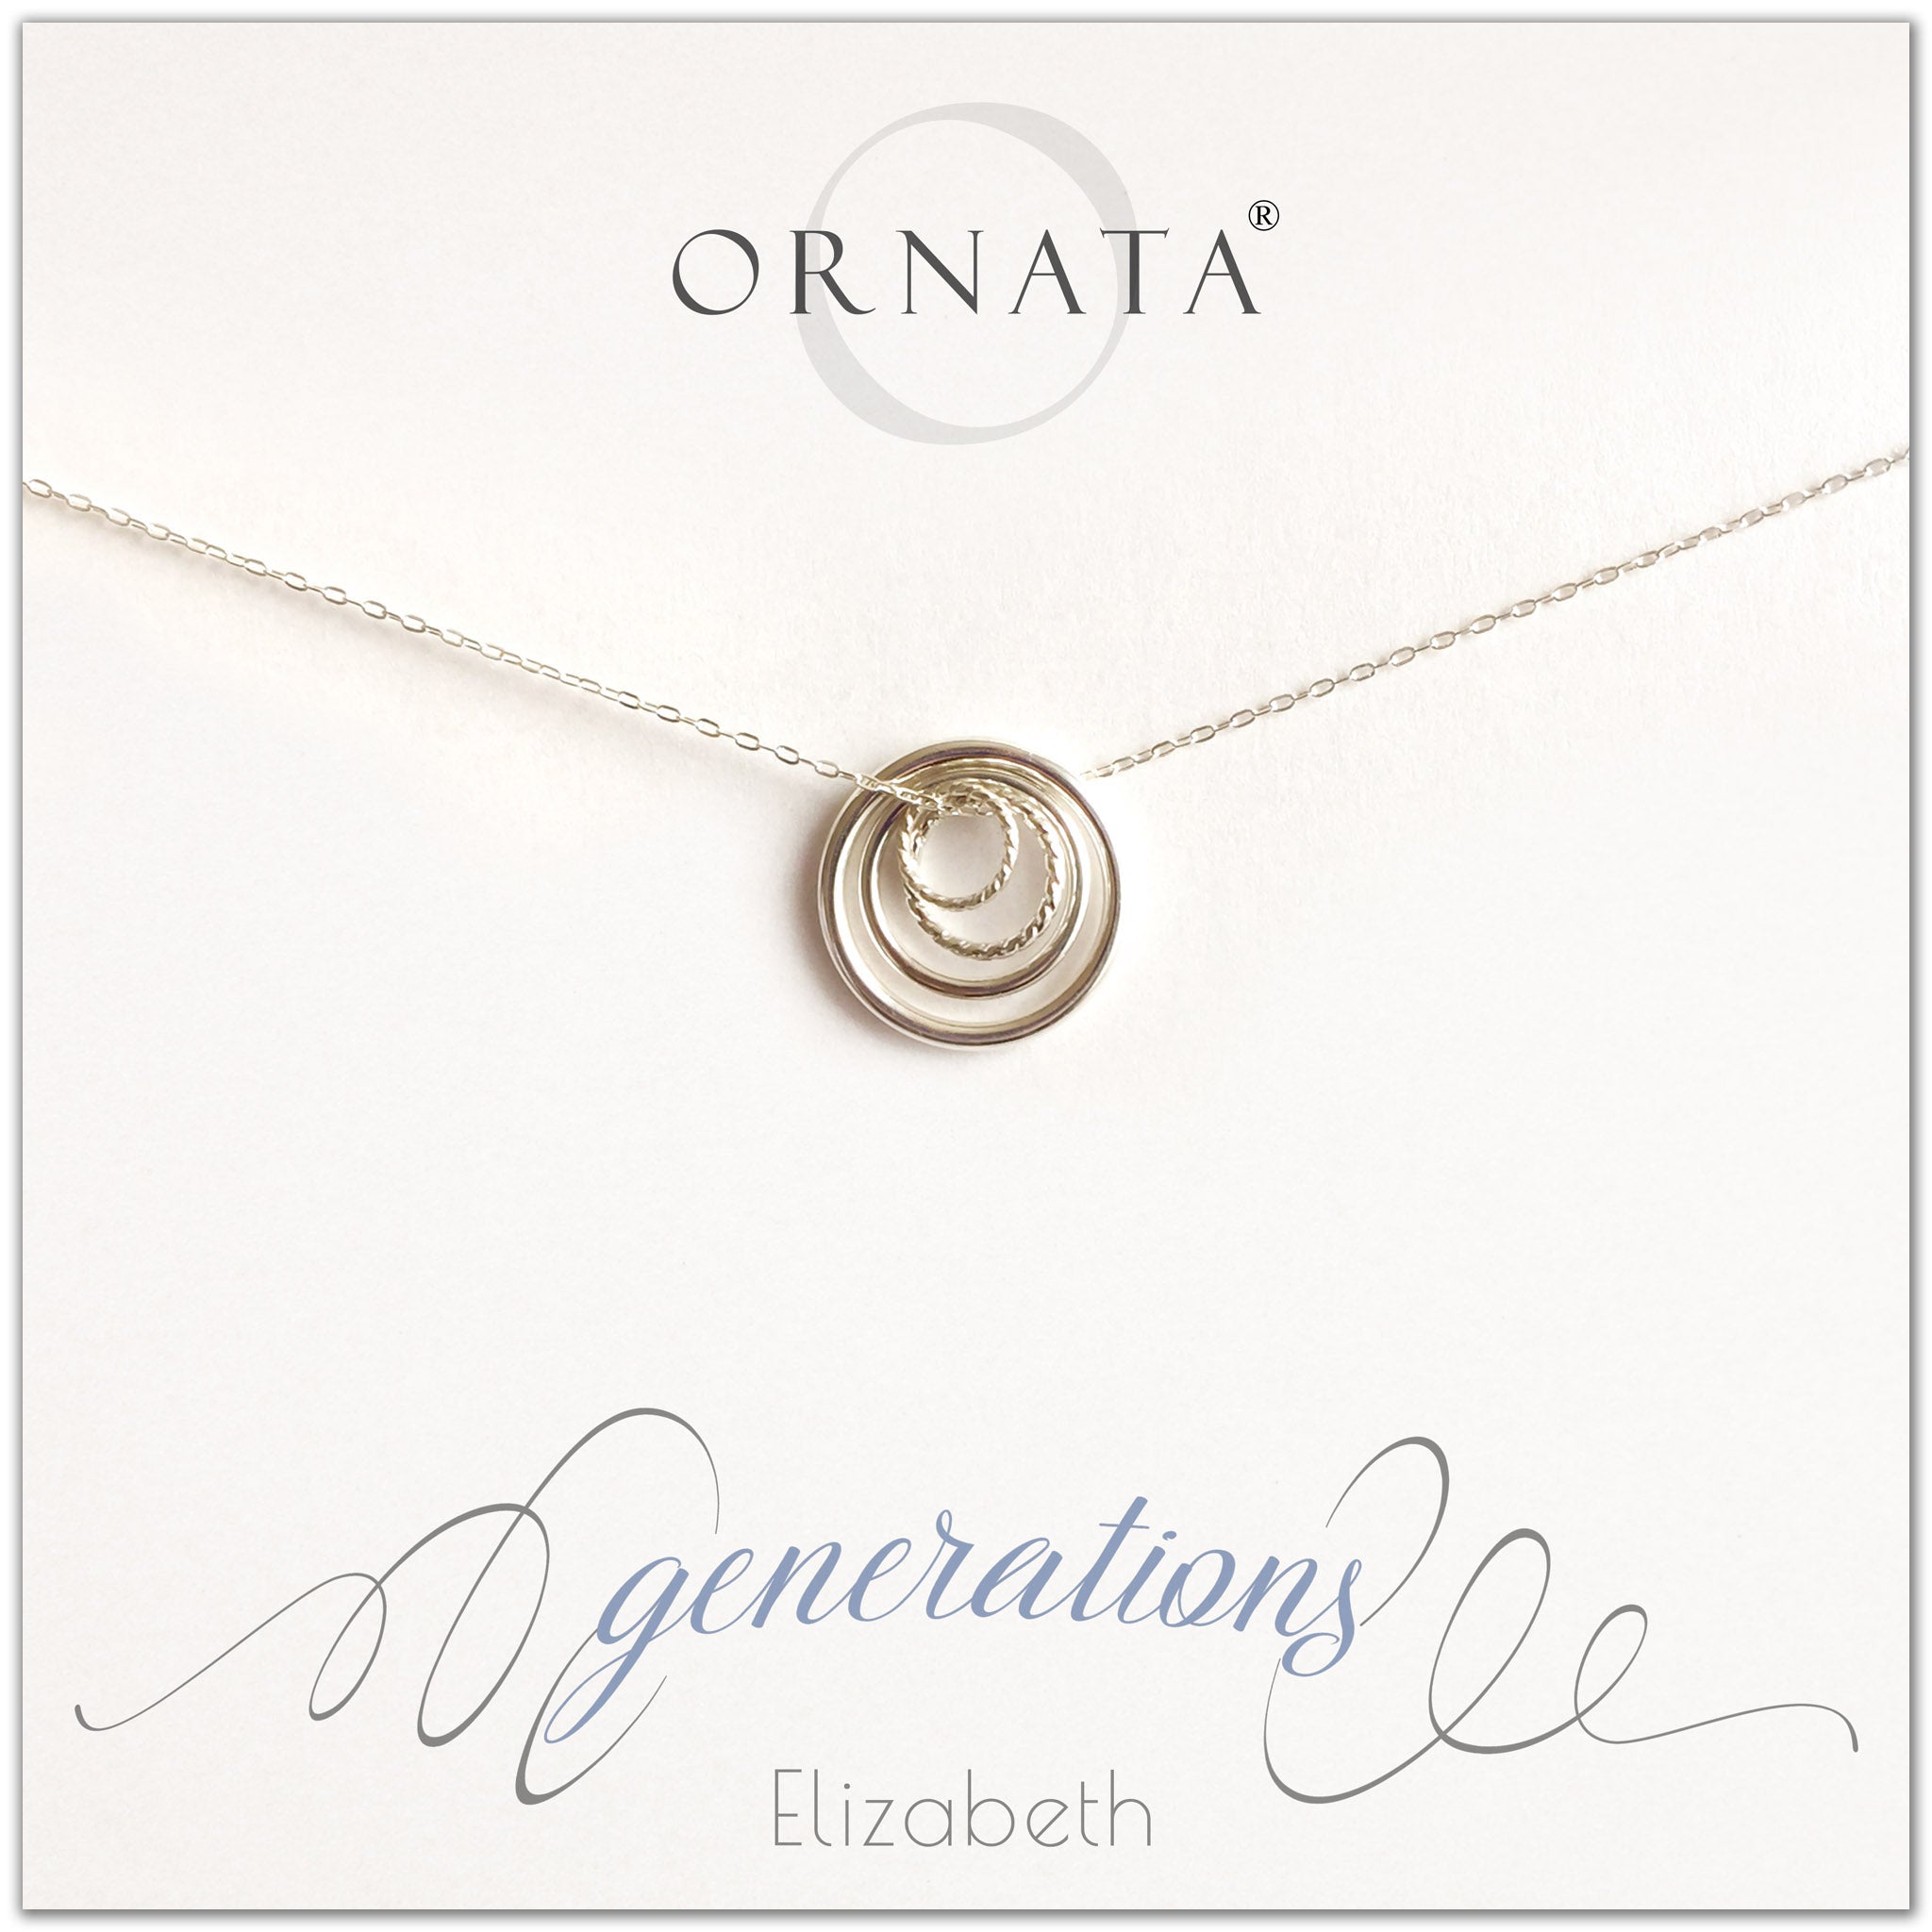 Generations Jewelry - personalized silver necklaces. Our sterling silver custom jewelry is a perfect gift for mothers, daughters, granddaughters, grandmothers, grandmas, sisters, or family members. Four rings represent three generations. Perfect gift for Mother’s Day or Mother’s Day Jewelry. 